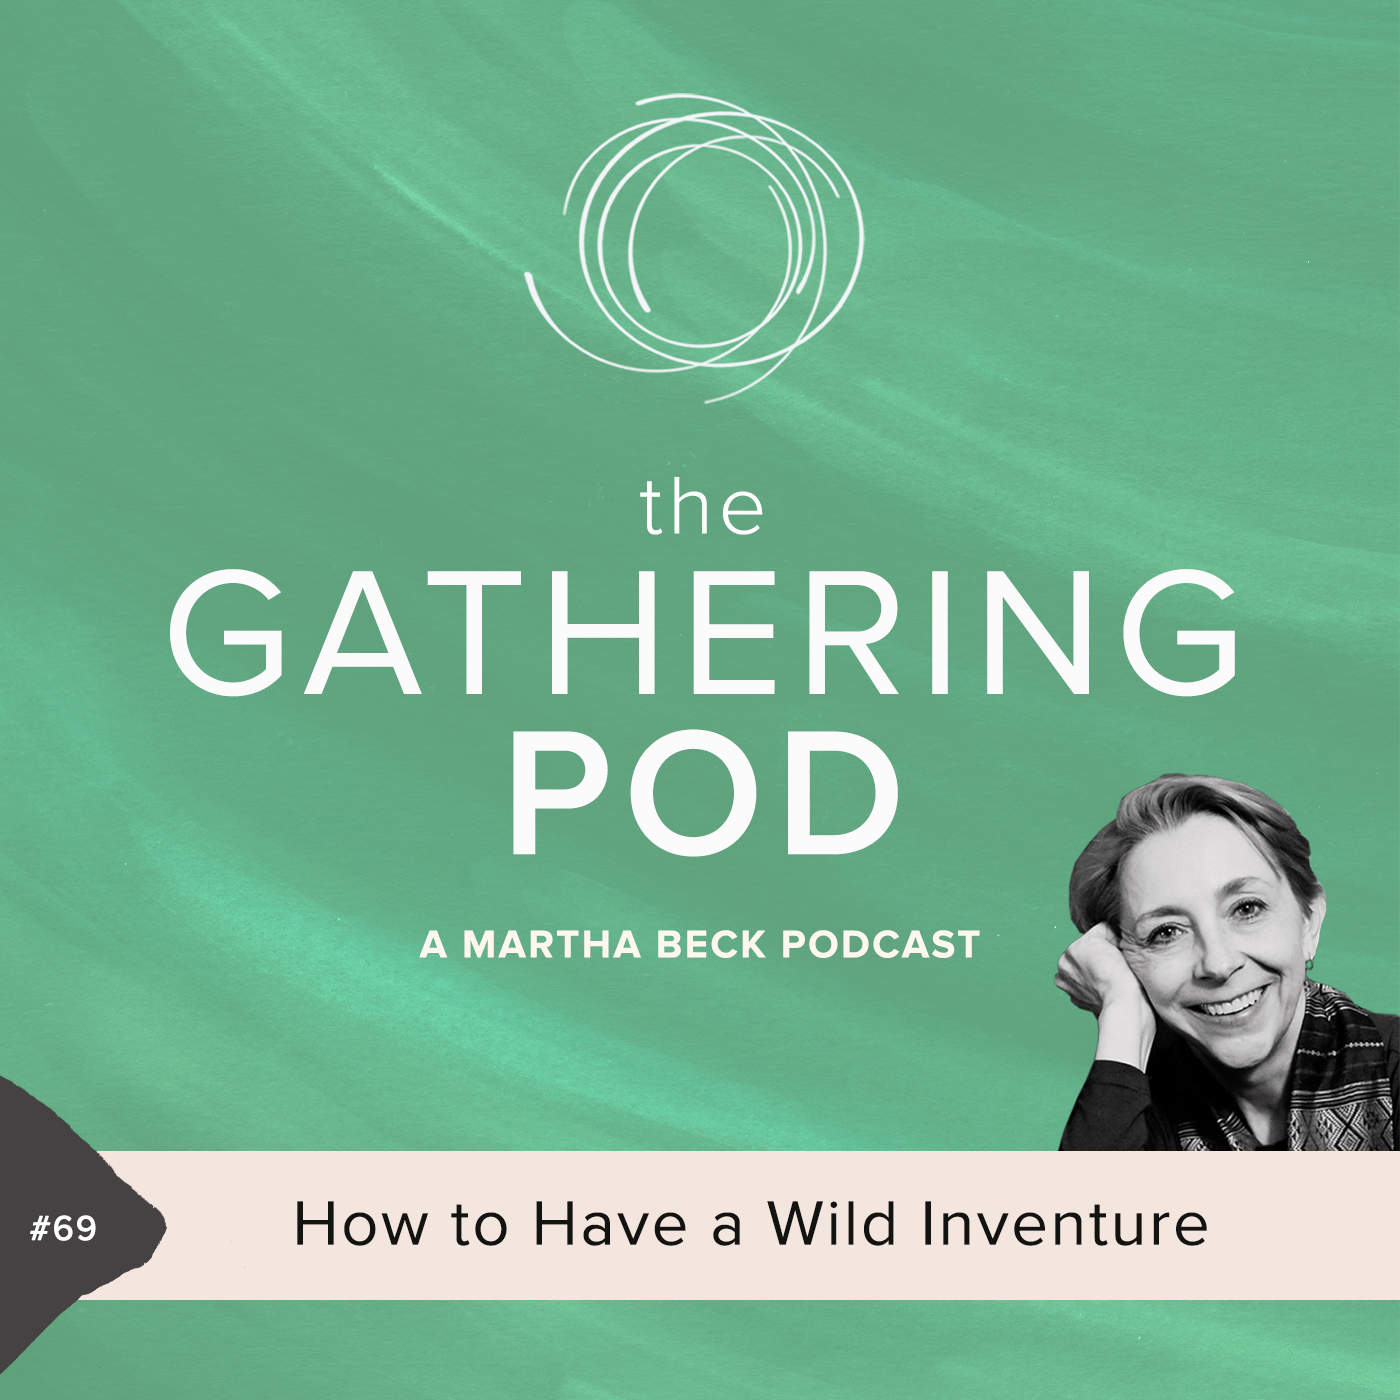 Image for The Gathering Pod A Martha Beck Podcast Episode #69 How to Have a Wild Inventure